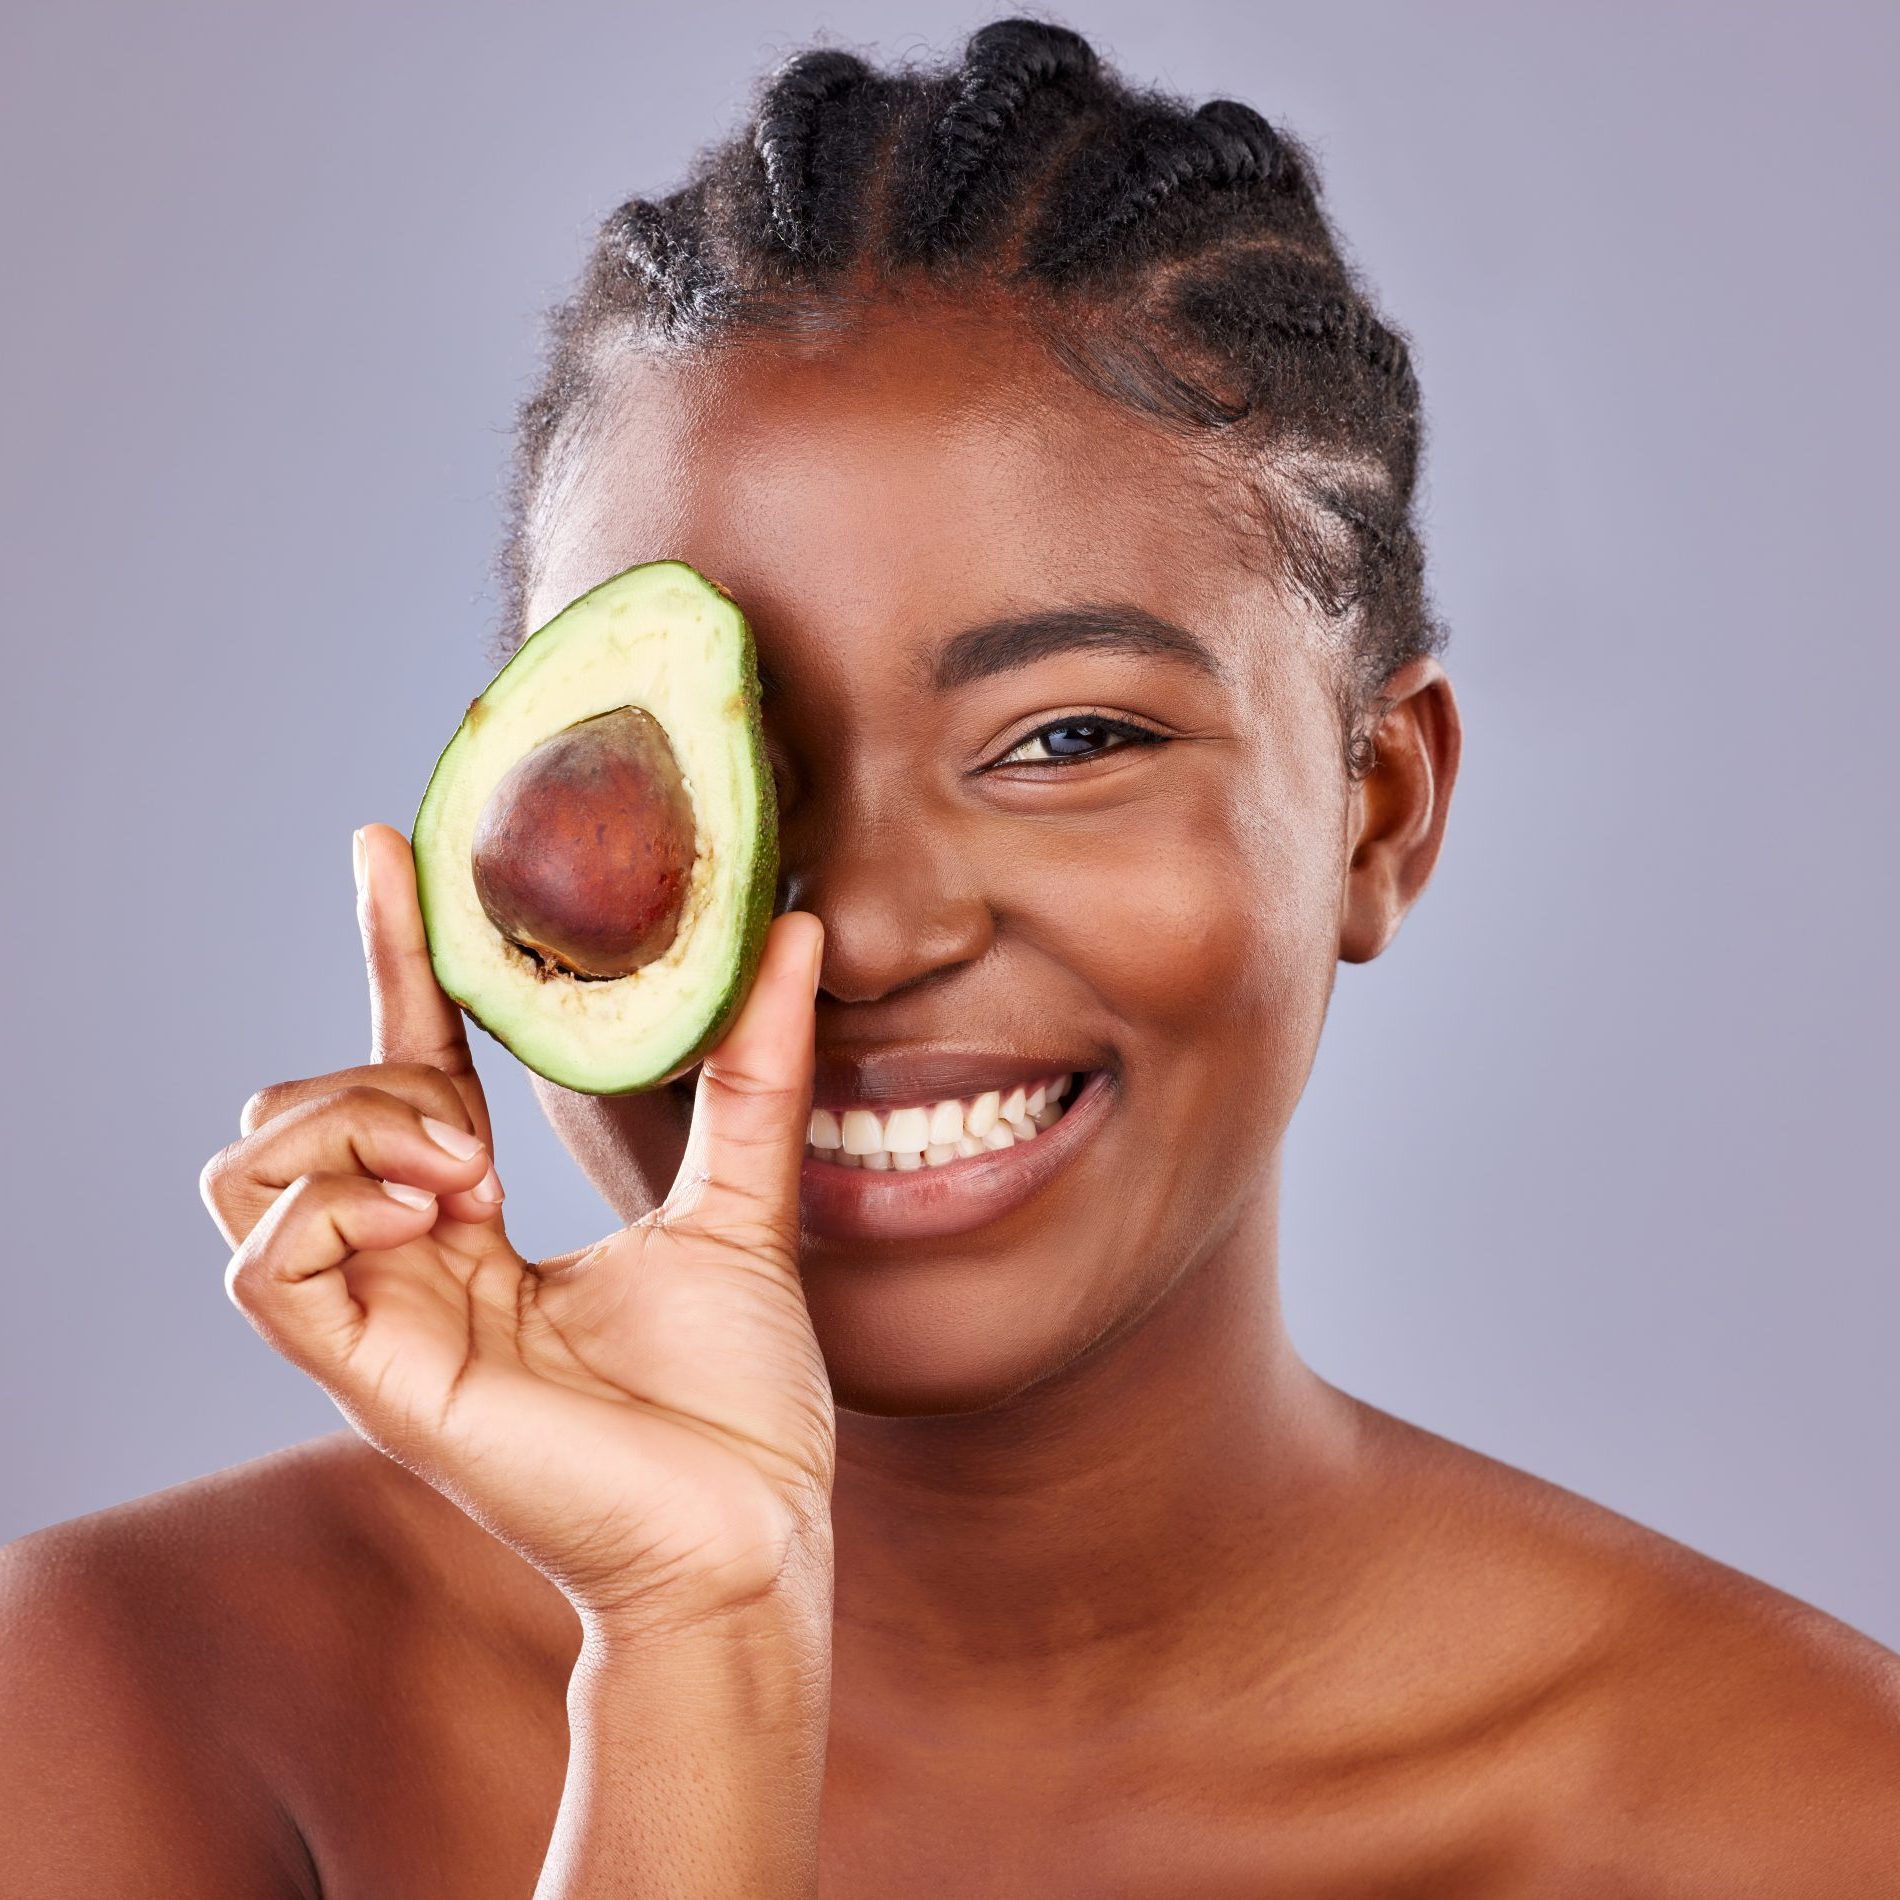 woman-holding-avocado-for-homemade-face-mask-for-skin-conditions